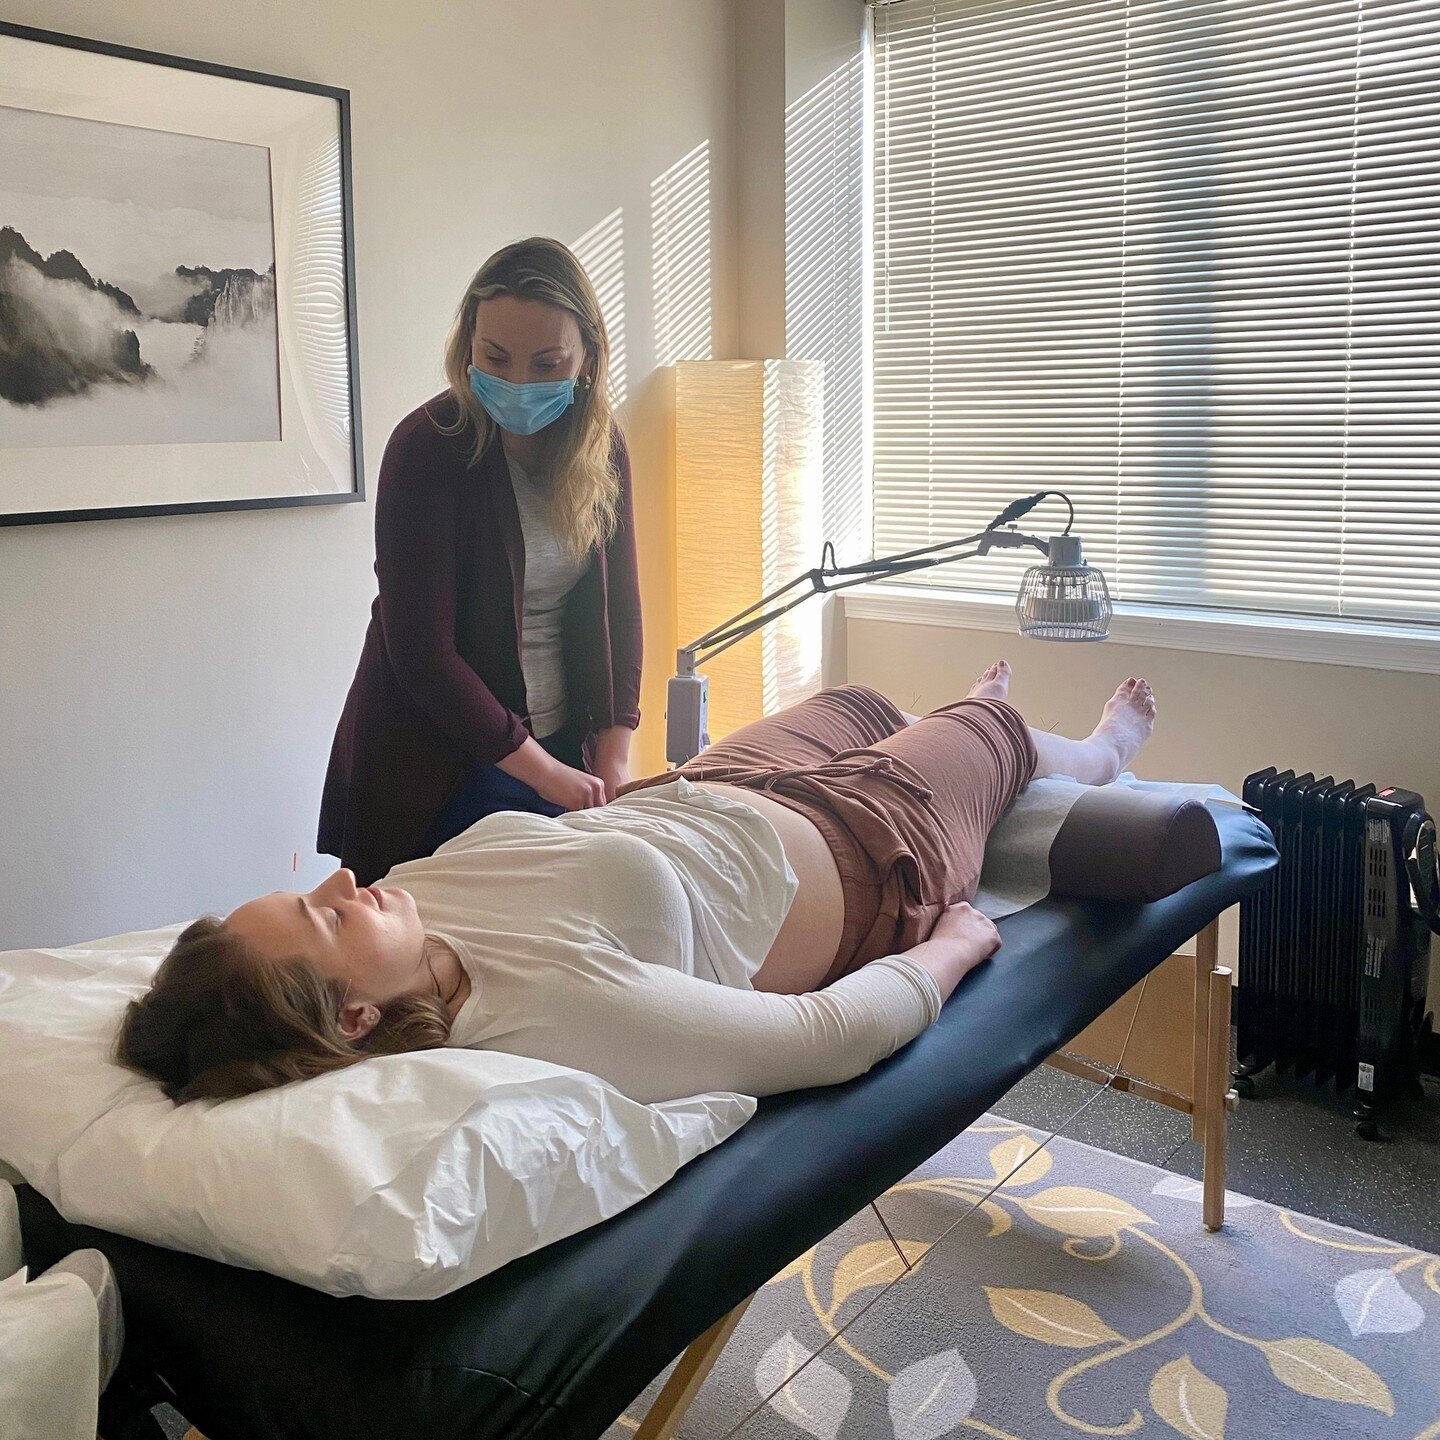 Acupuncture 🤝 weekends. We have weekend availability at every office and are prepared to help you soften into your time off.⁠
On Saturdays, you can find Heather in Bryn Mawr, Kelly in Exton, Dawn in Rittenhouse, and Dejota in Old City. (Julie is als